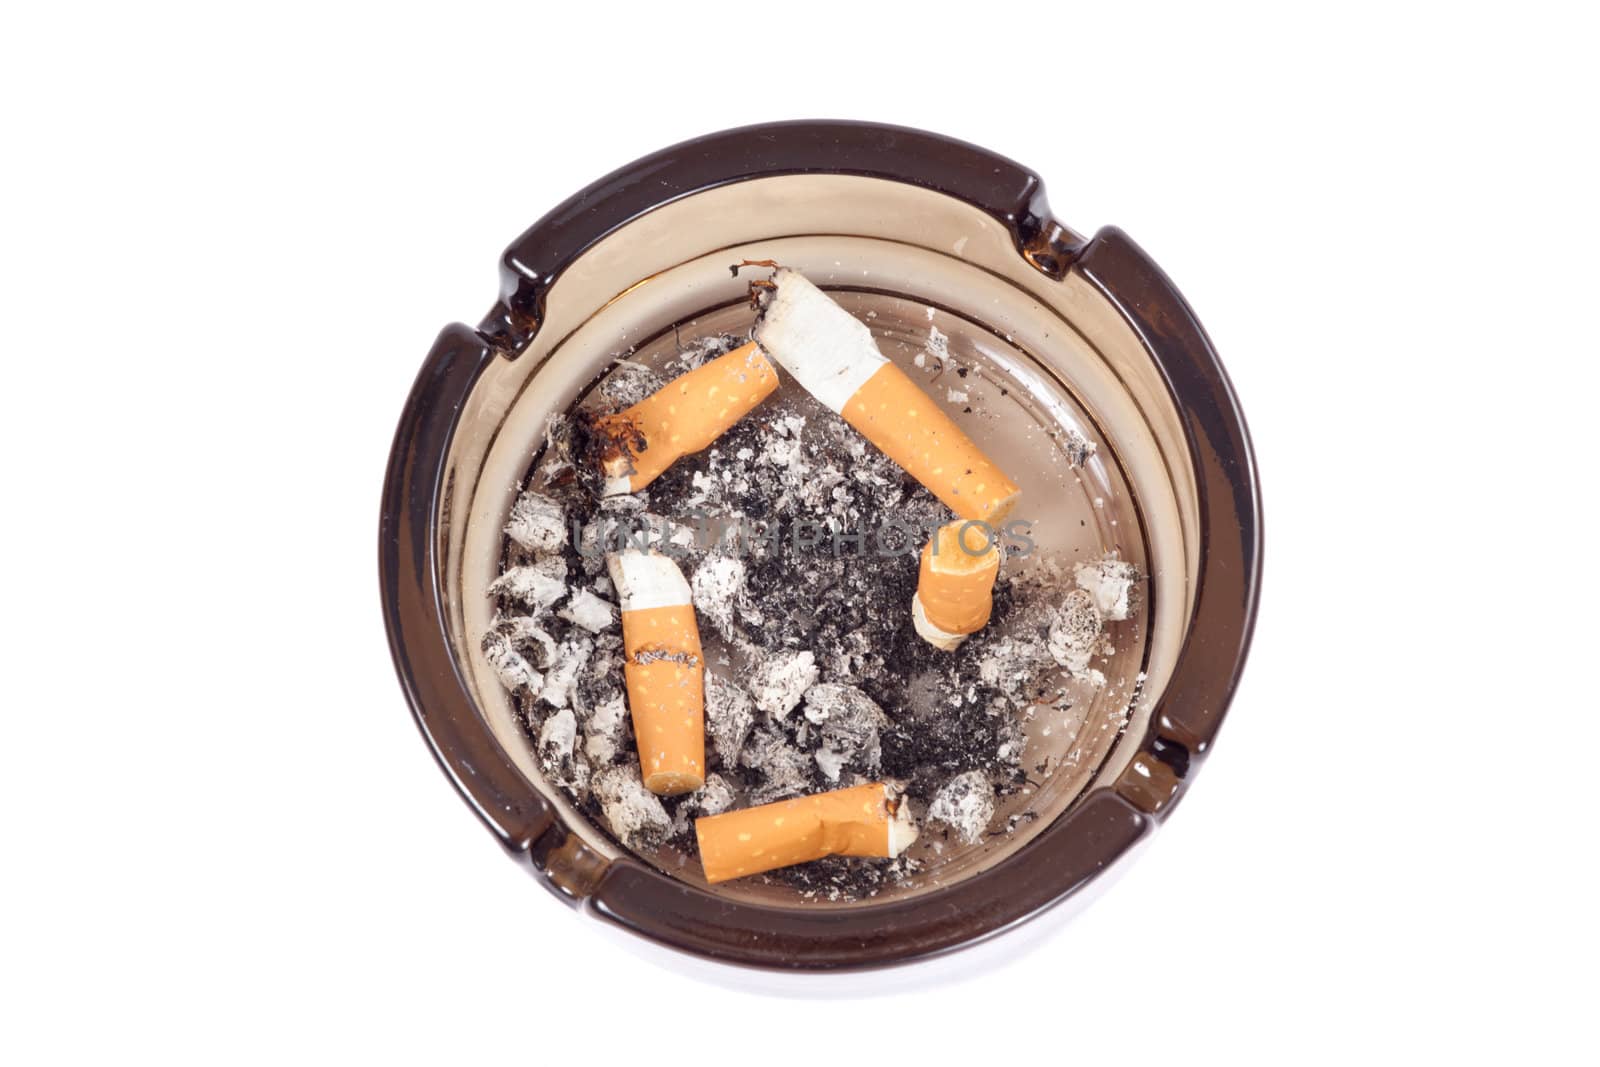 A flithy glass ash-tray, photo on the white background 